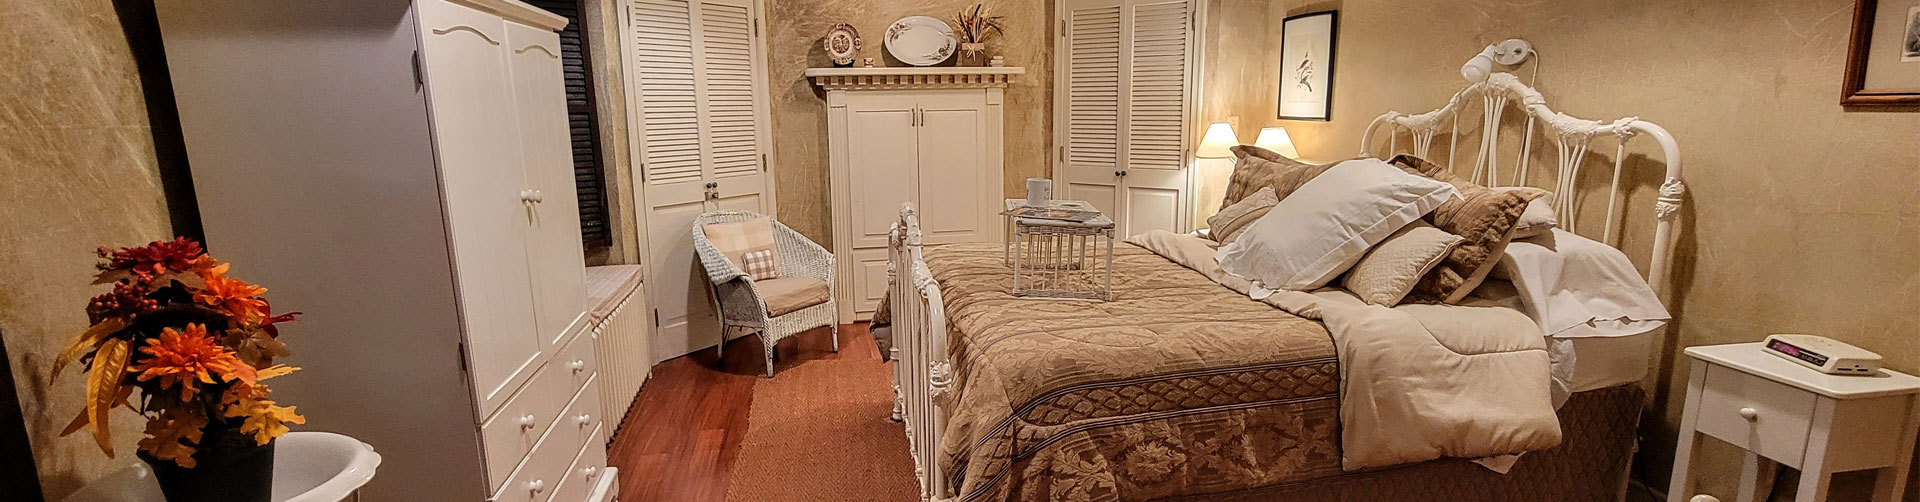 Montclair Bed & Breakfast Rooms and Rates